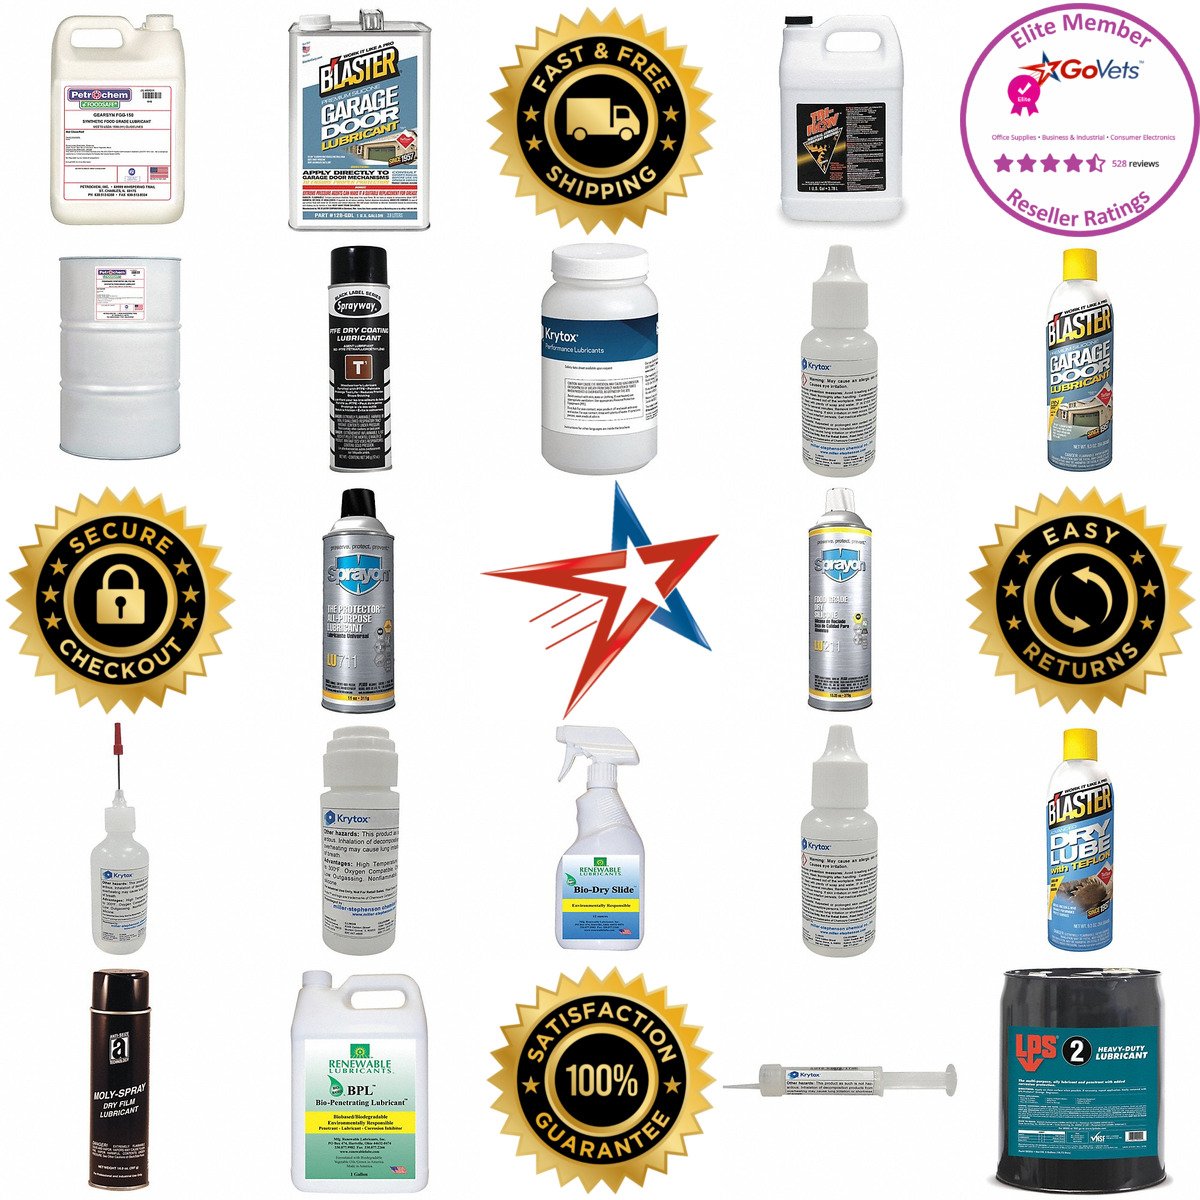 A selection of Lubricant products on GoVets